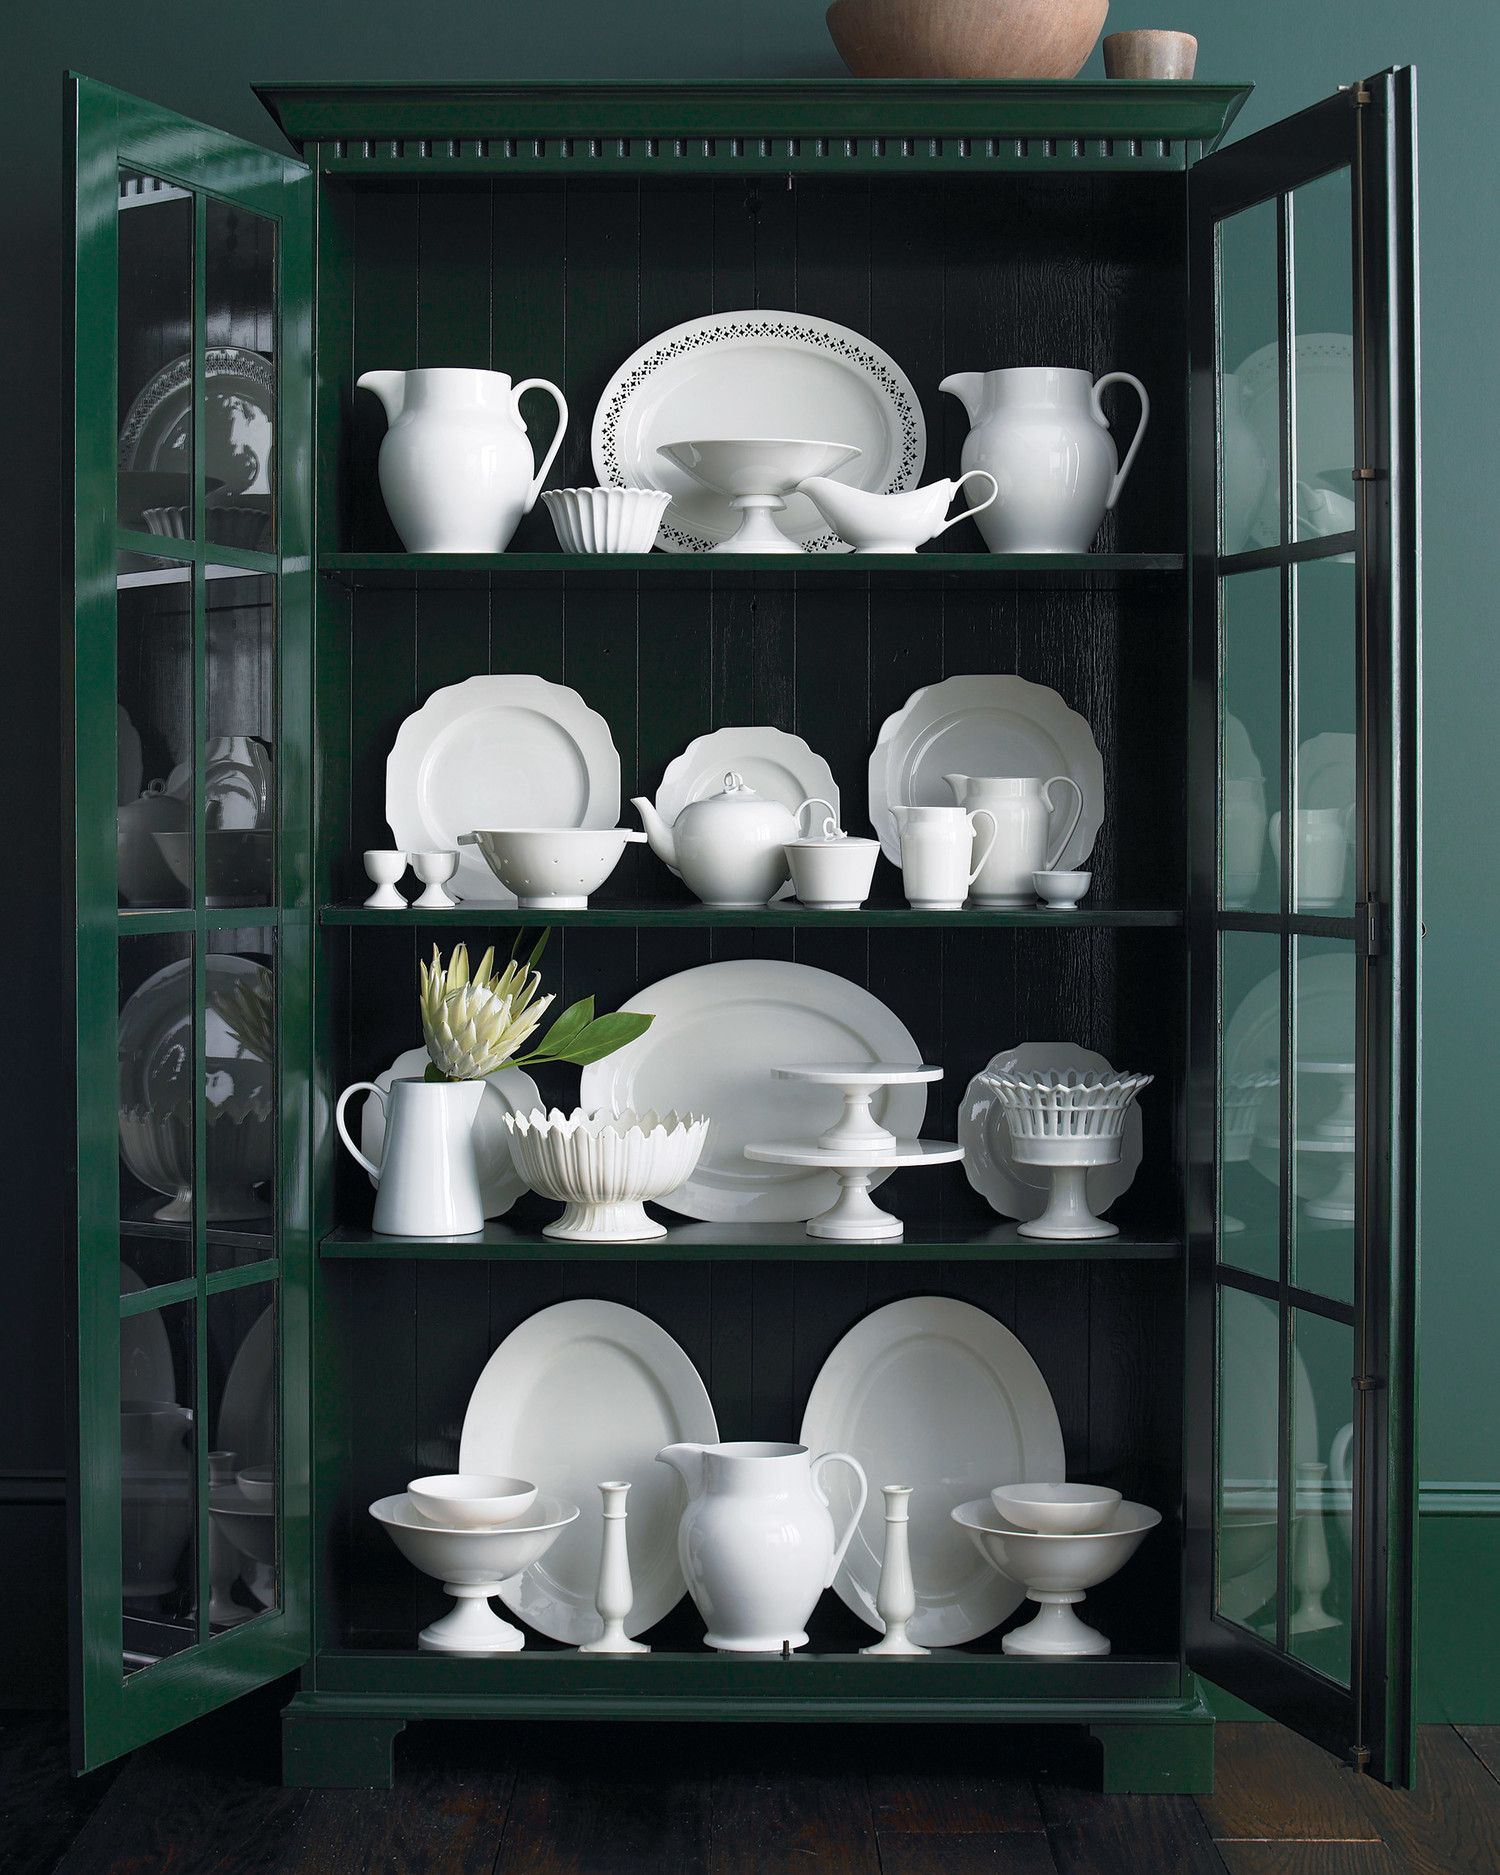 How To Display China In A Cabinet